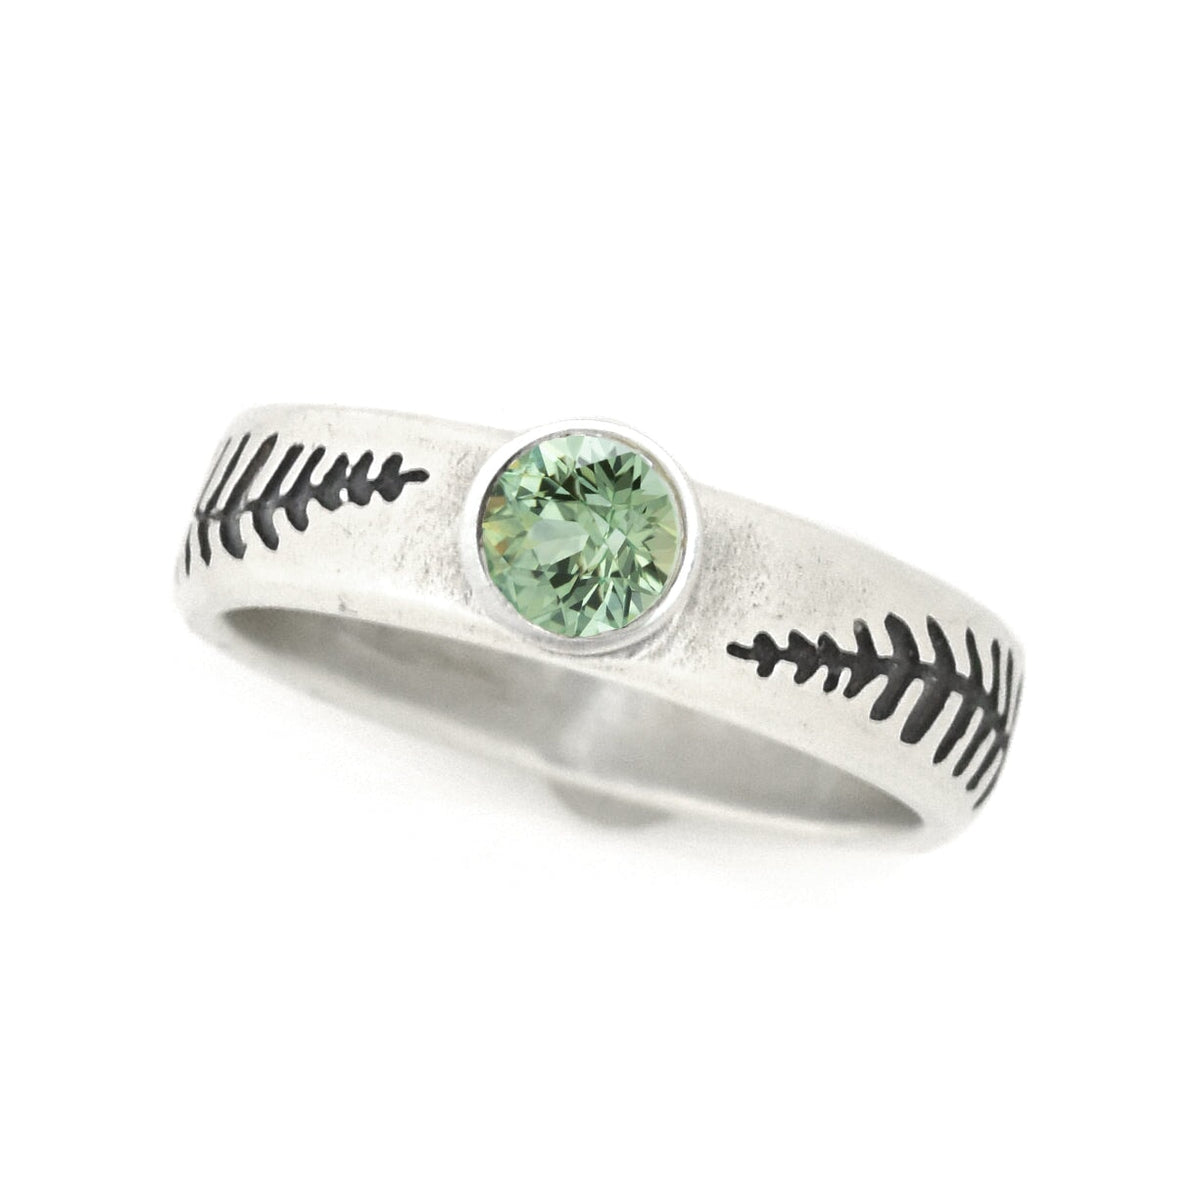 Sparkling Fond Fern Ring - your choice of 5mm stone - Wedding Ring Recycled Diamond Conflict Free Diamond 6978 - handmade by Beth Millner Jewelry